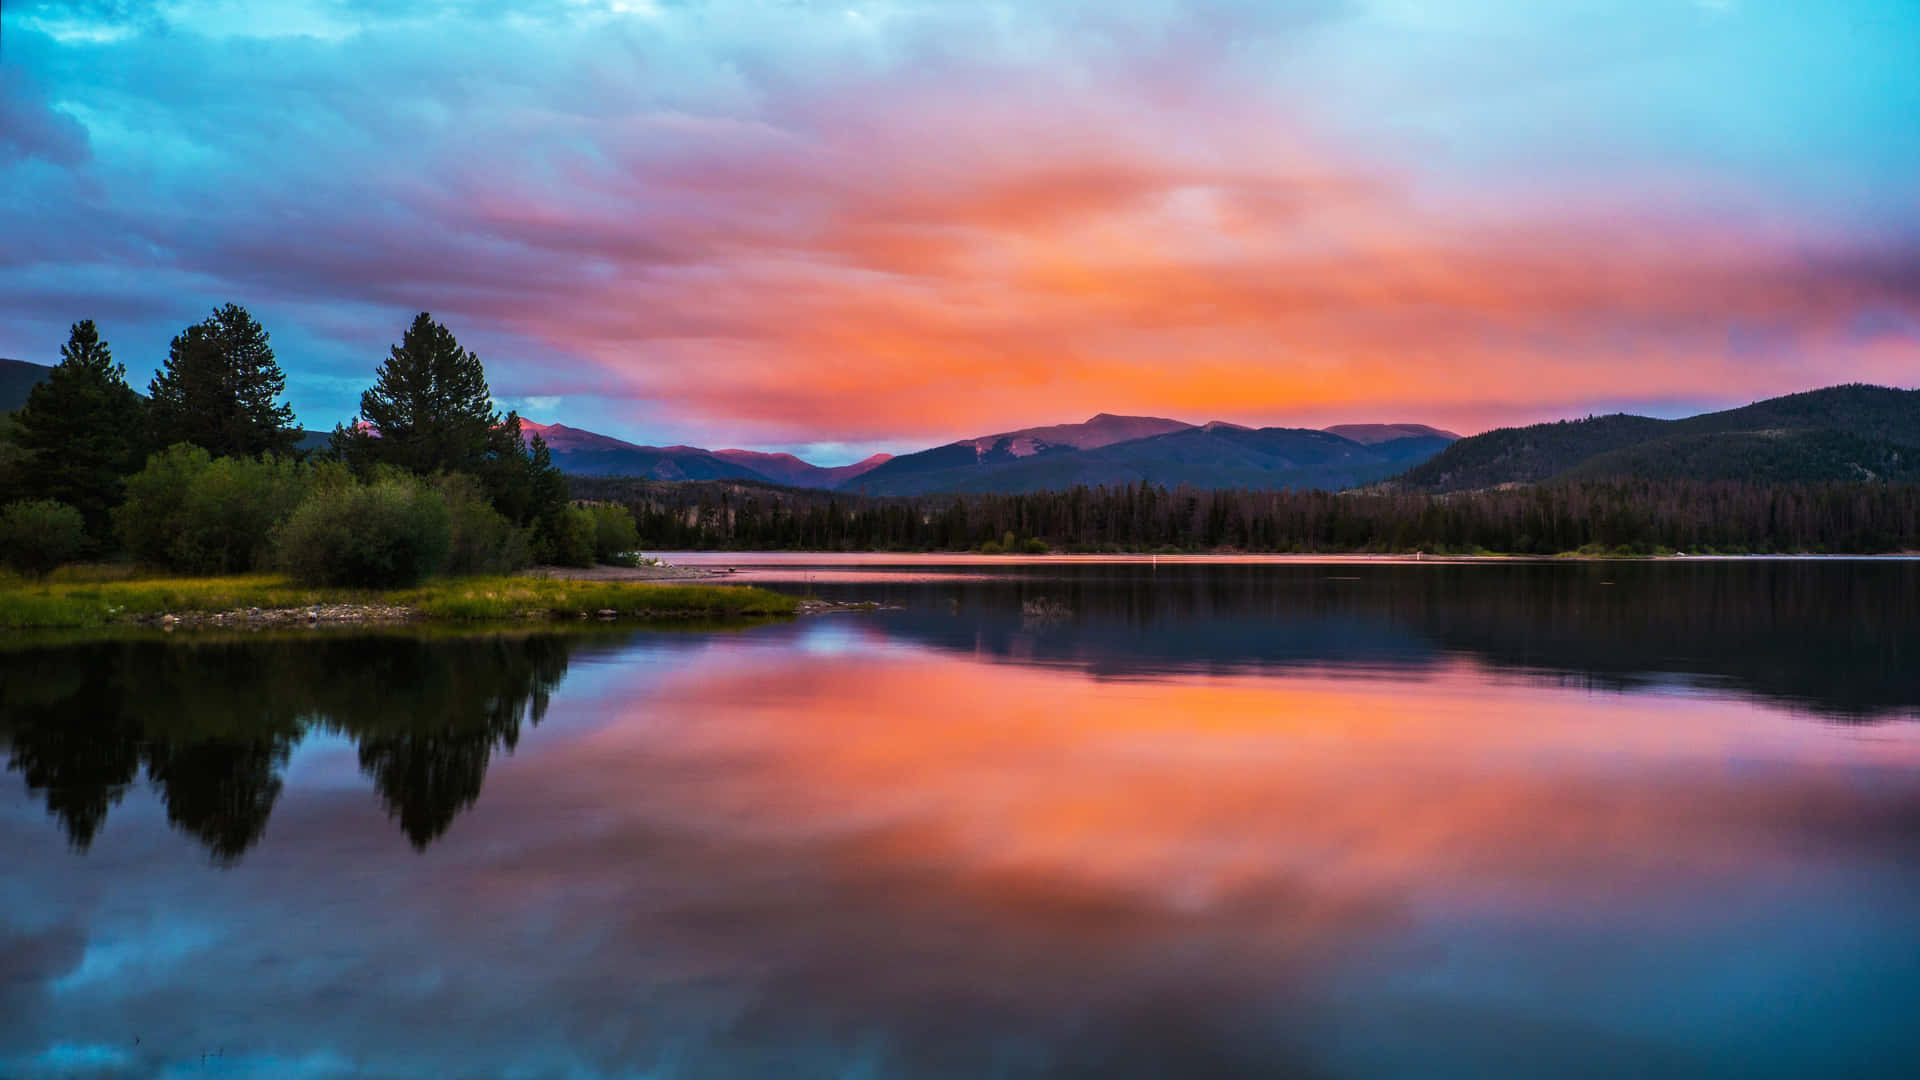 A Colorful Sunset Over A Lake And Mountains